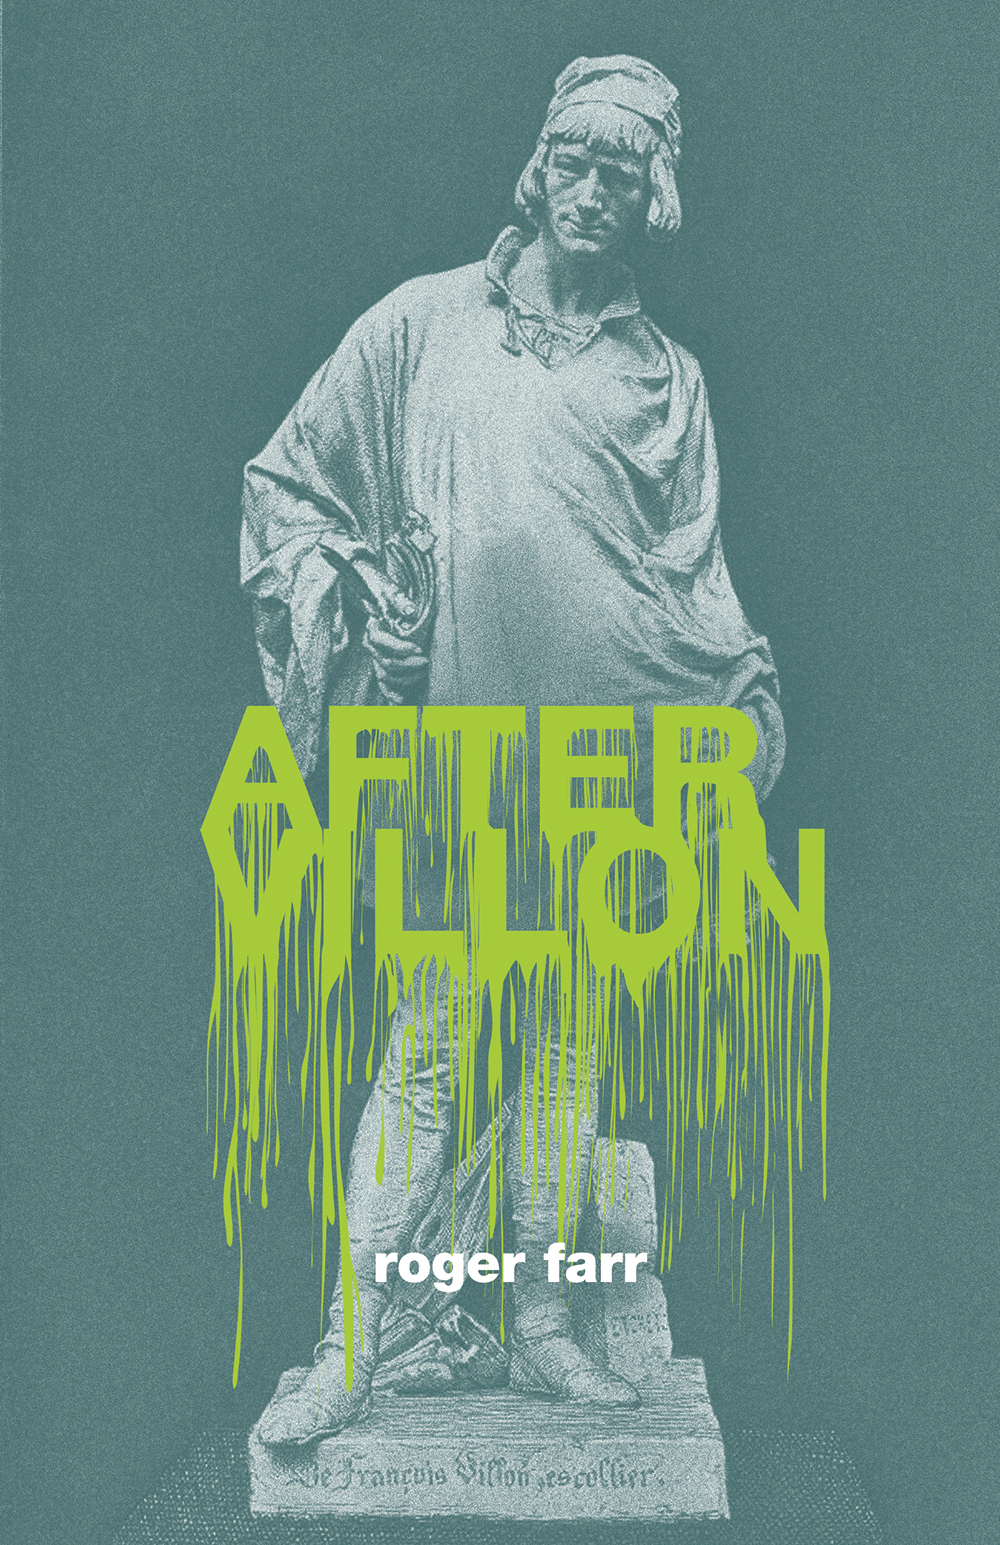 After Villon by Roger Farr